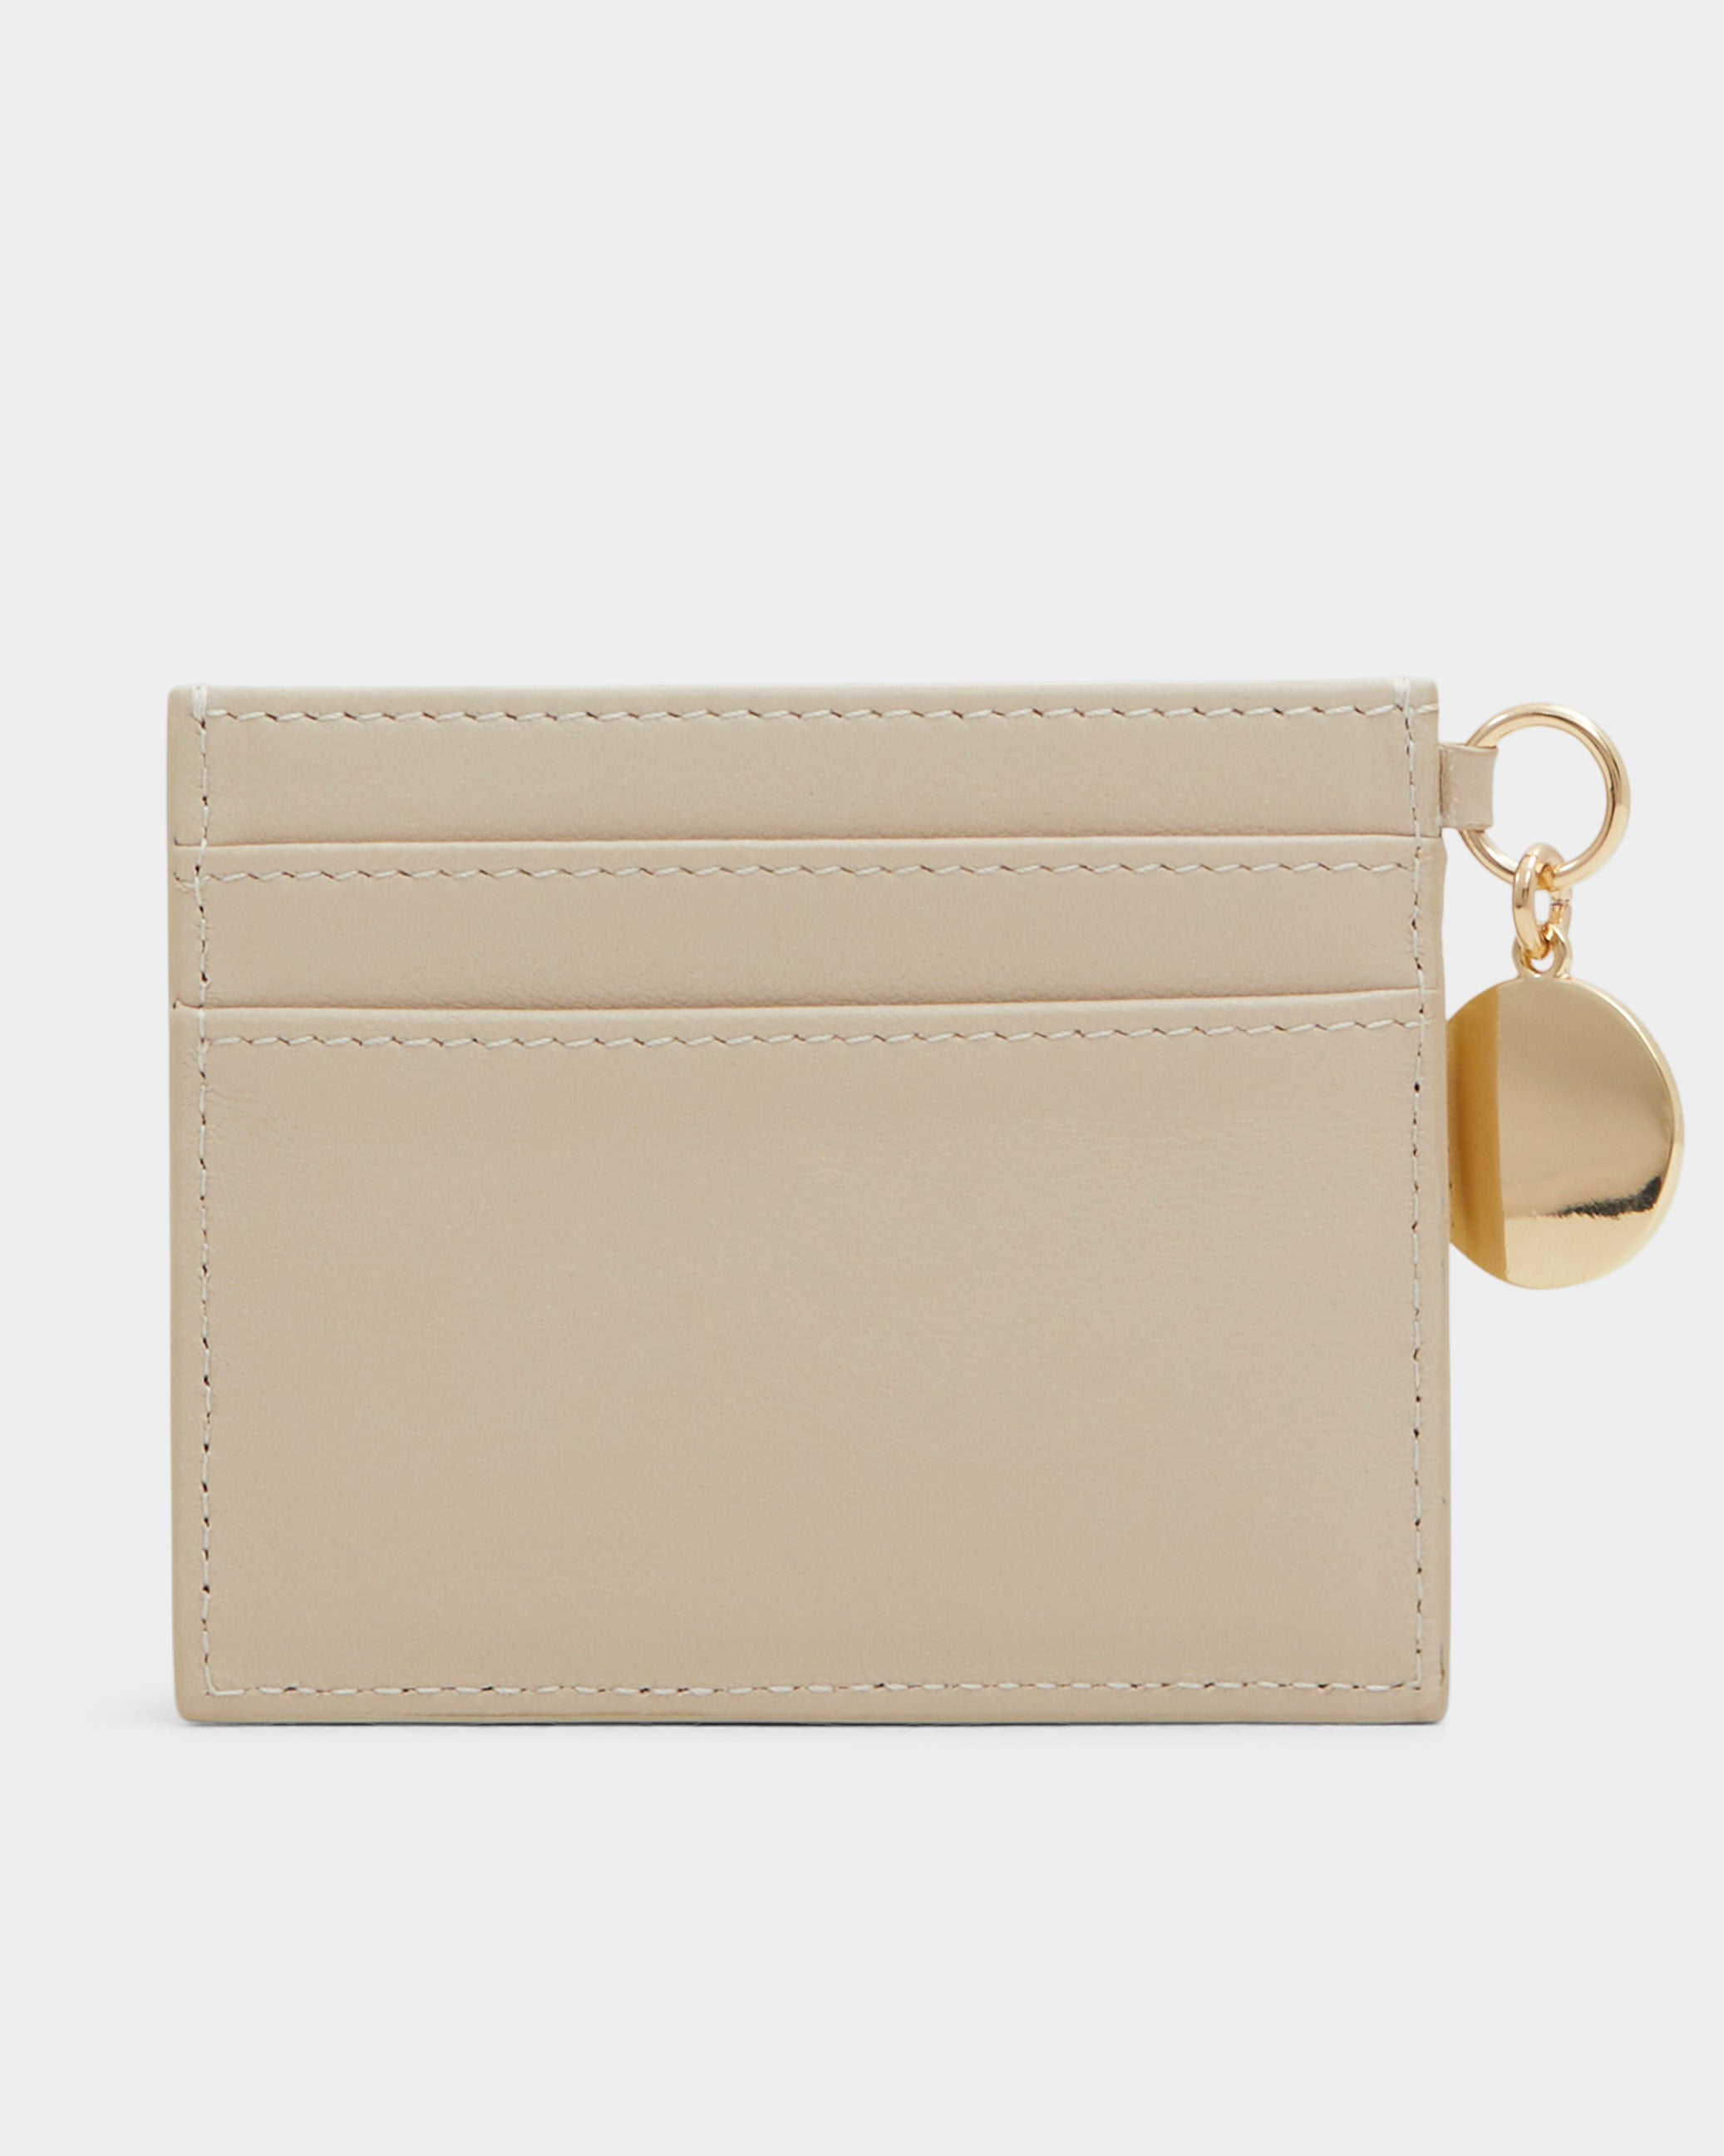 ANNA Ladies Wallets – Ted Baker, Canada